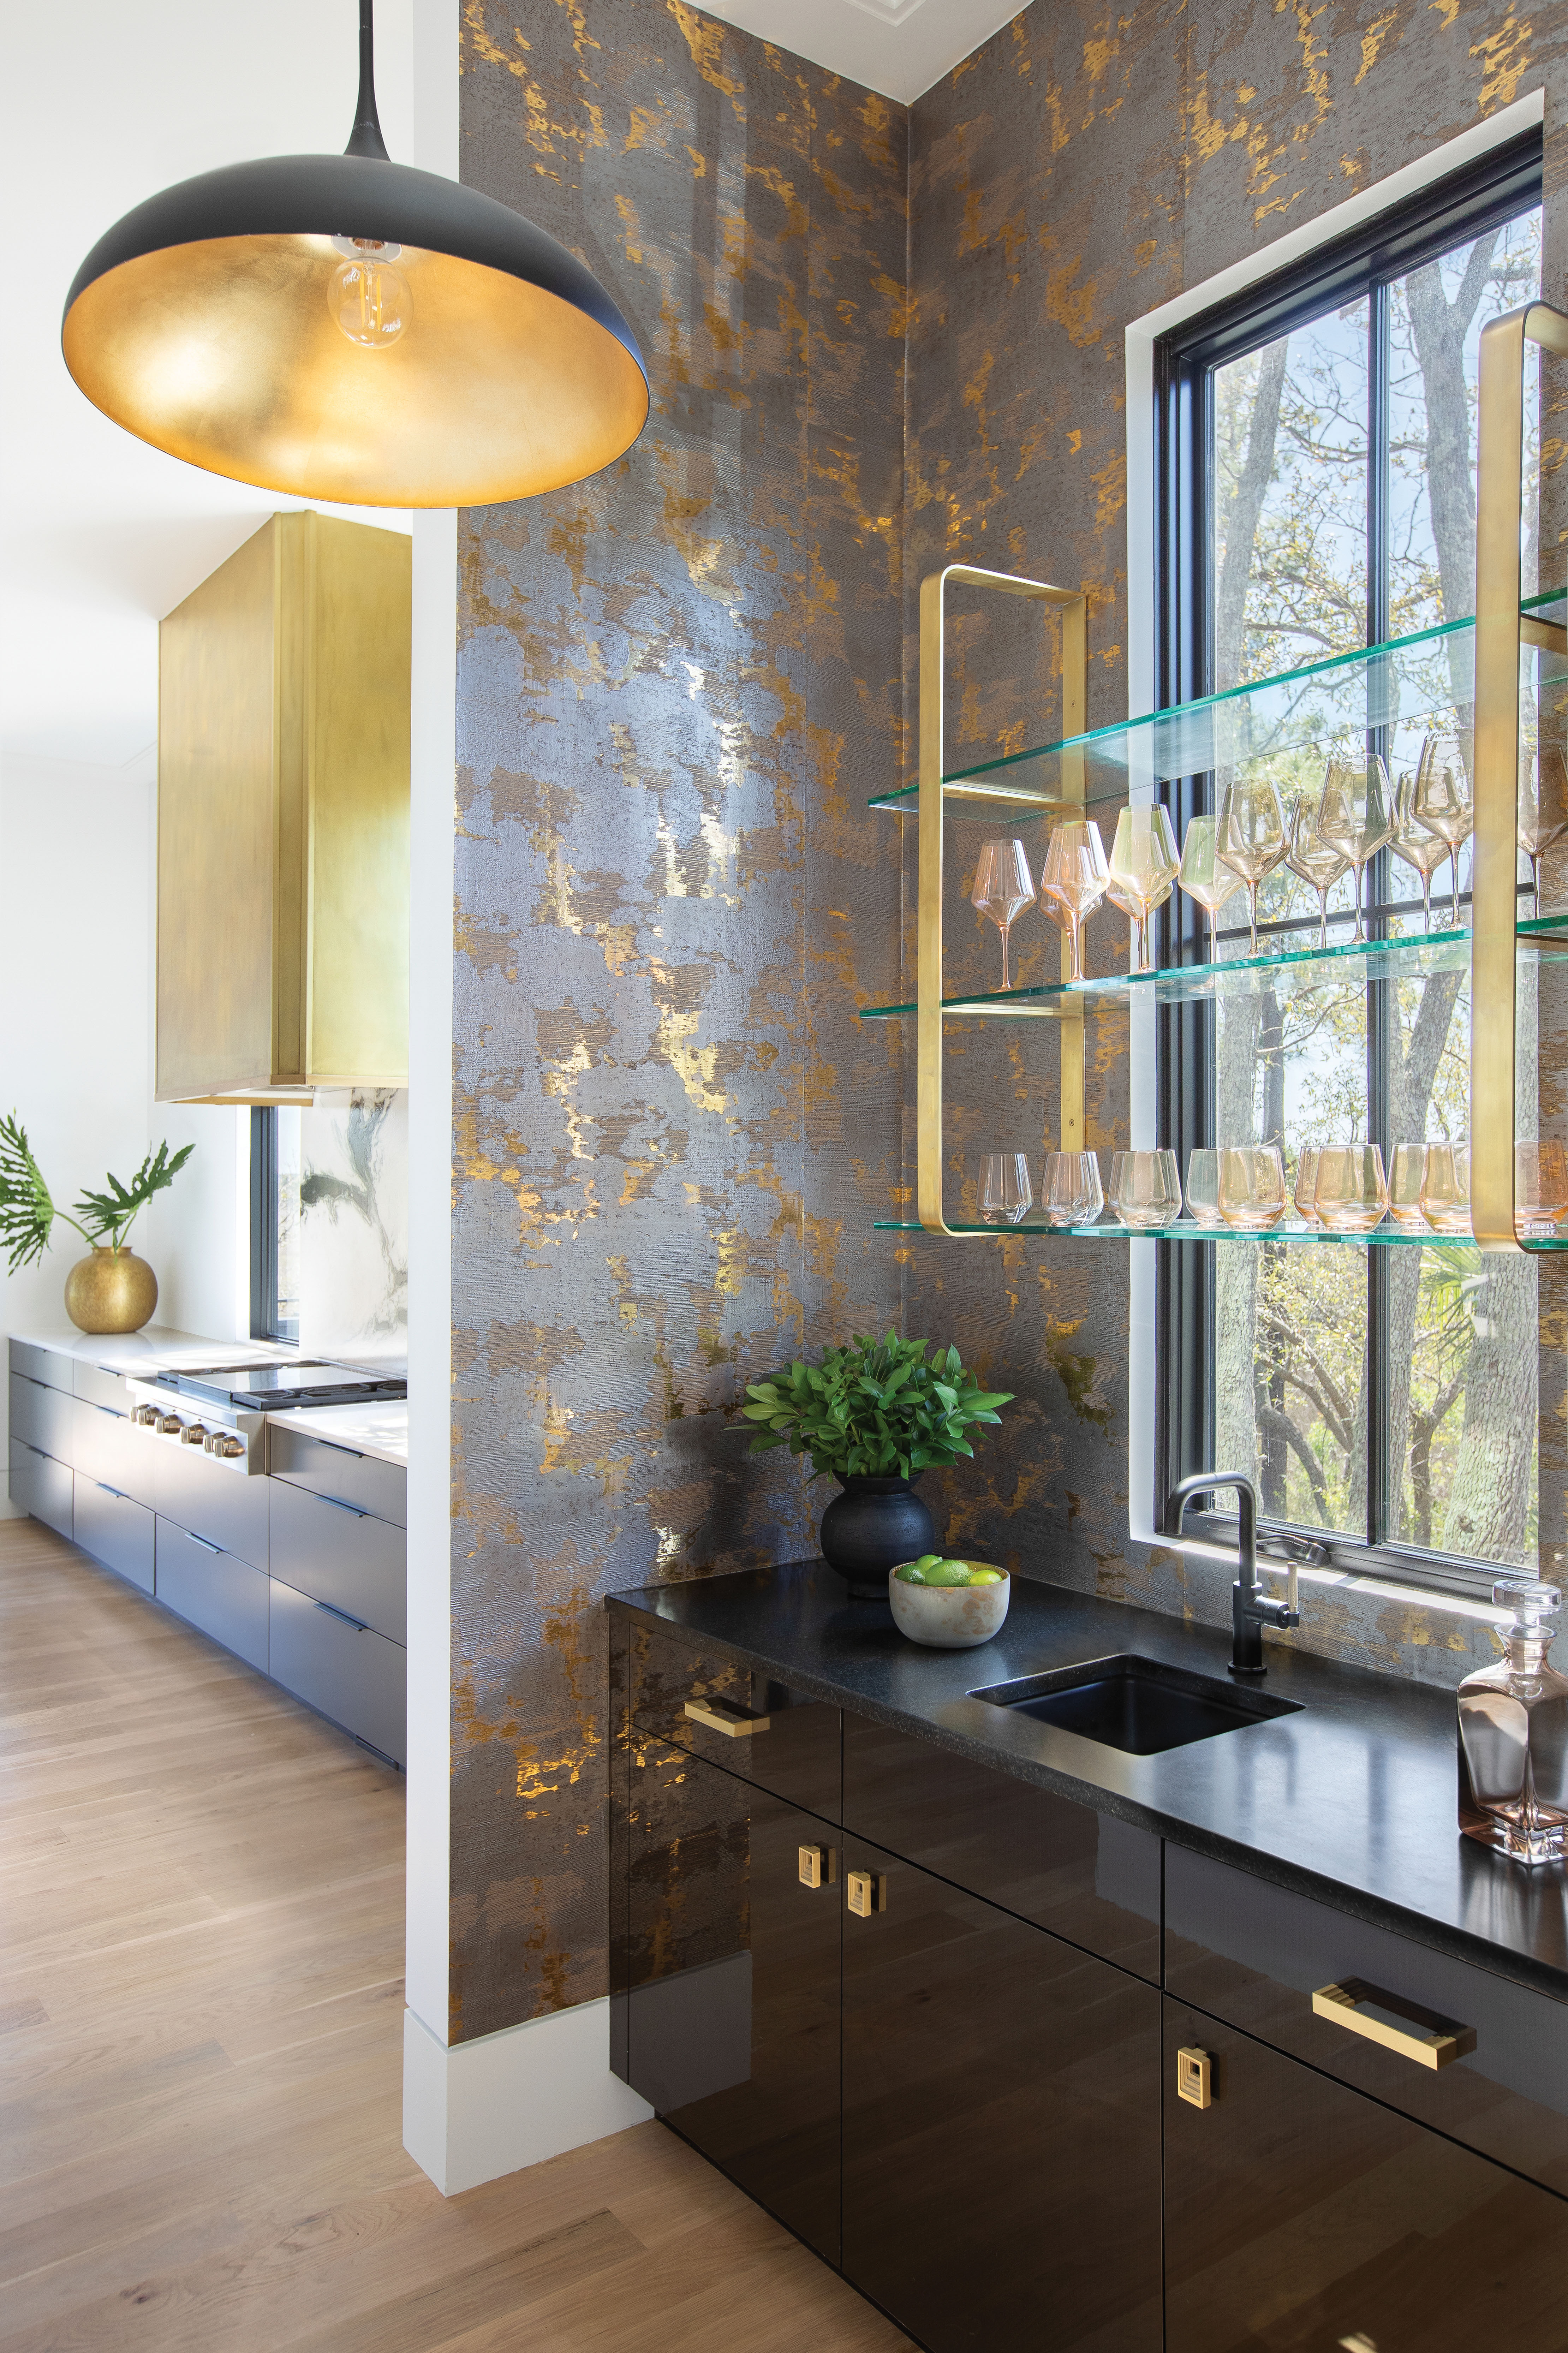 Brass Tactics: In the adjoining wet bar, Phillip Jeffries metallic “Enlightenment” wallpaper in “Tantra Taupe” complements a handcrafted set of floating brass and glass shelves by Bryan Reiss.